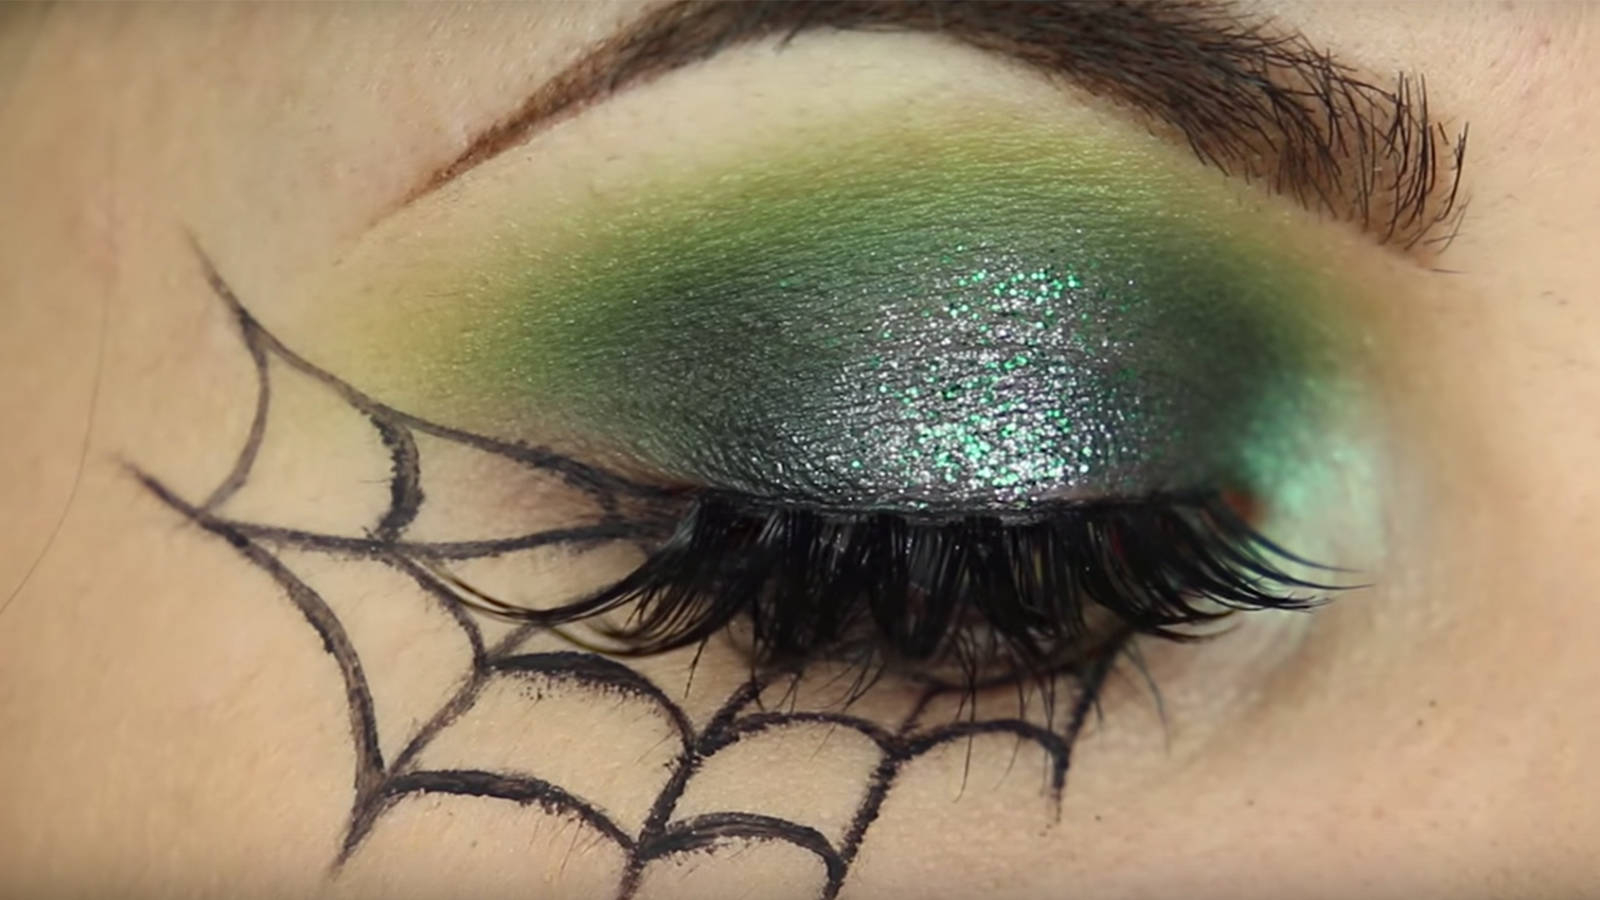 Eye Makeup For Halloween 8 Easy Halloween Makeup Tutorials For The Cheap Lazy Galore